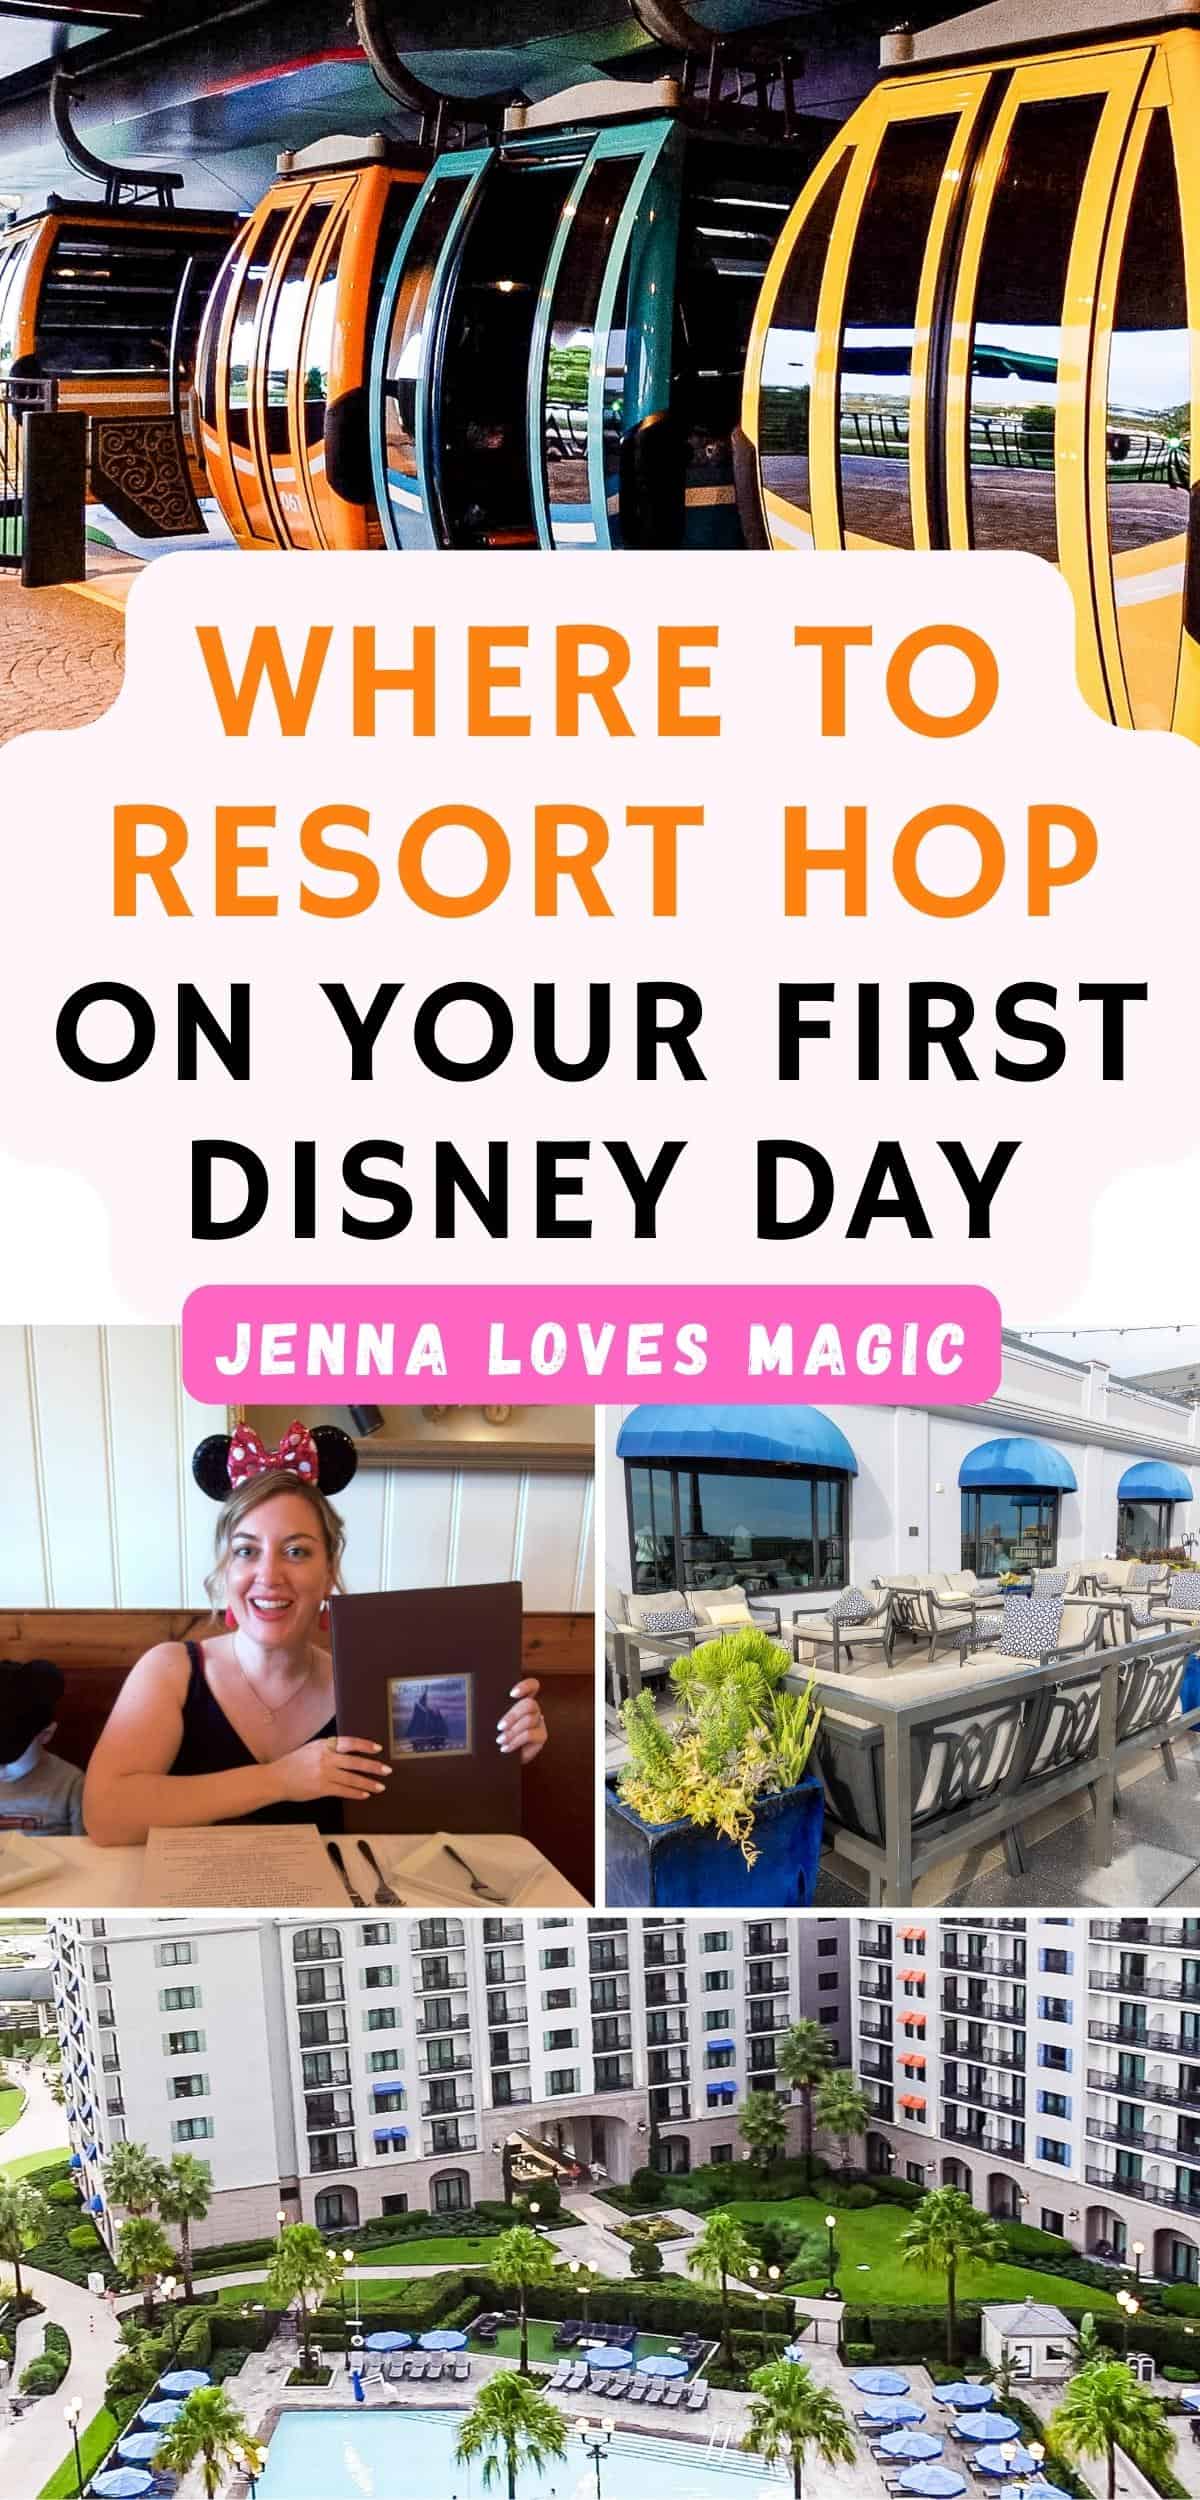 Resort hop collage for first day at Disney World planning with Jenna Loves Magic logo